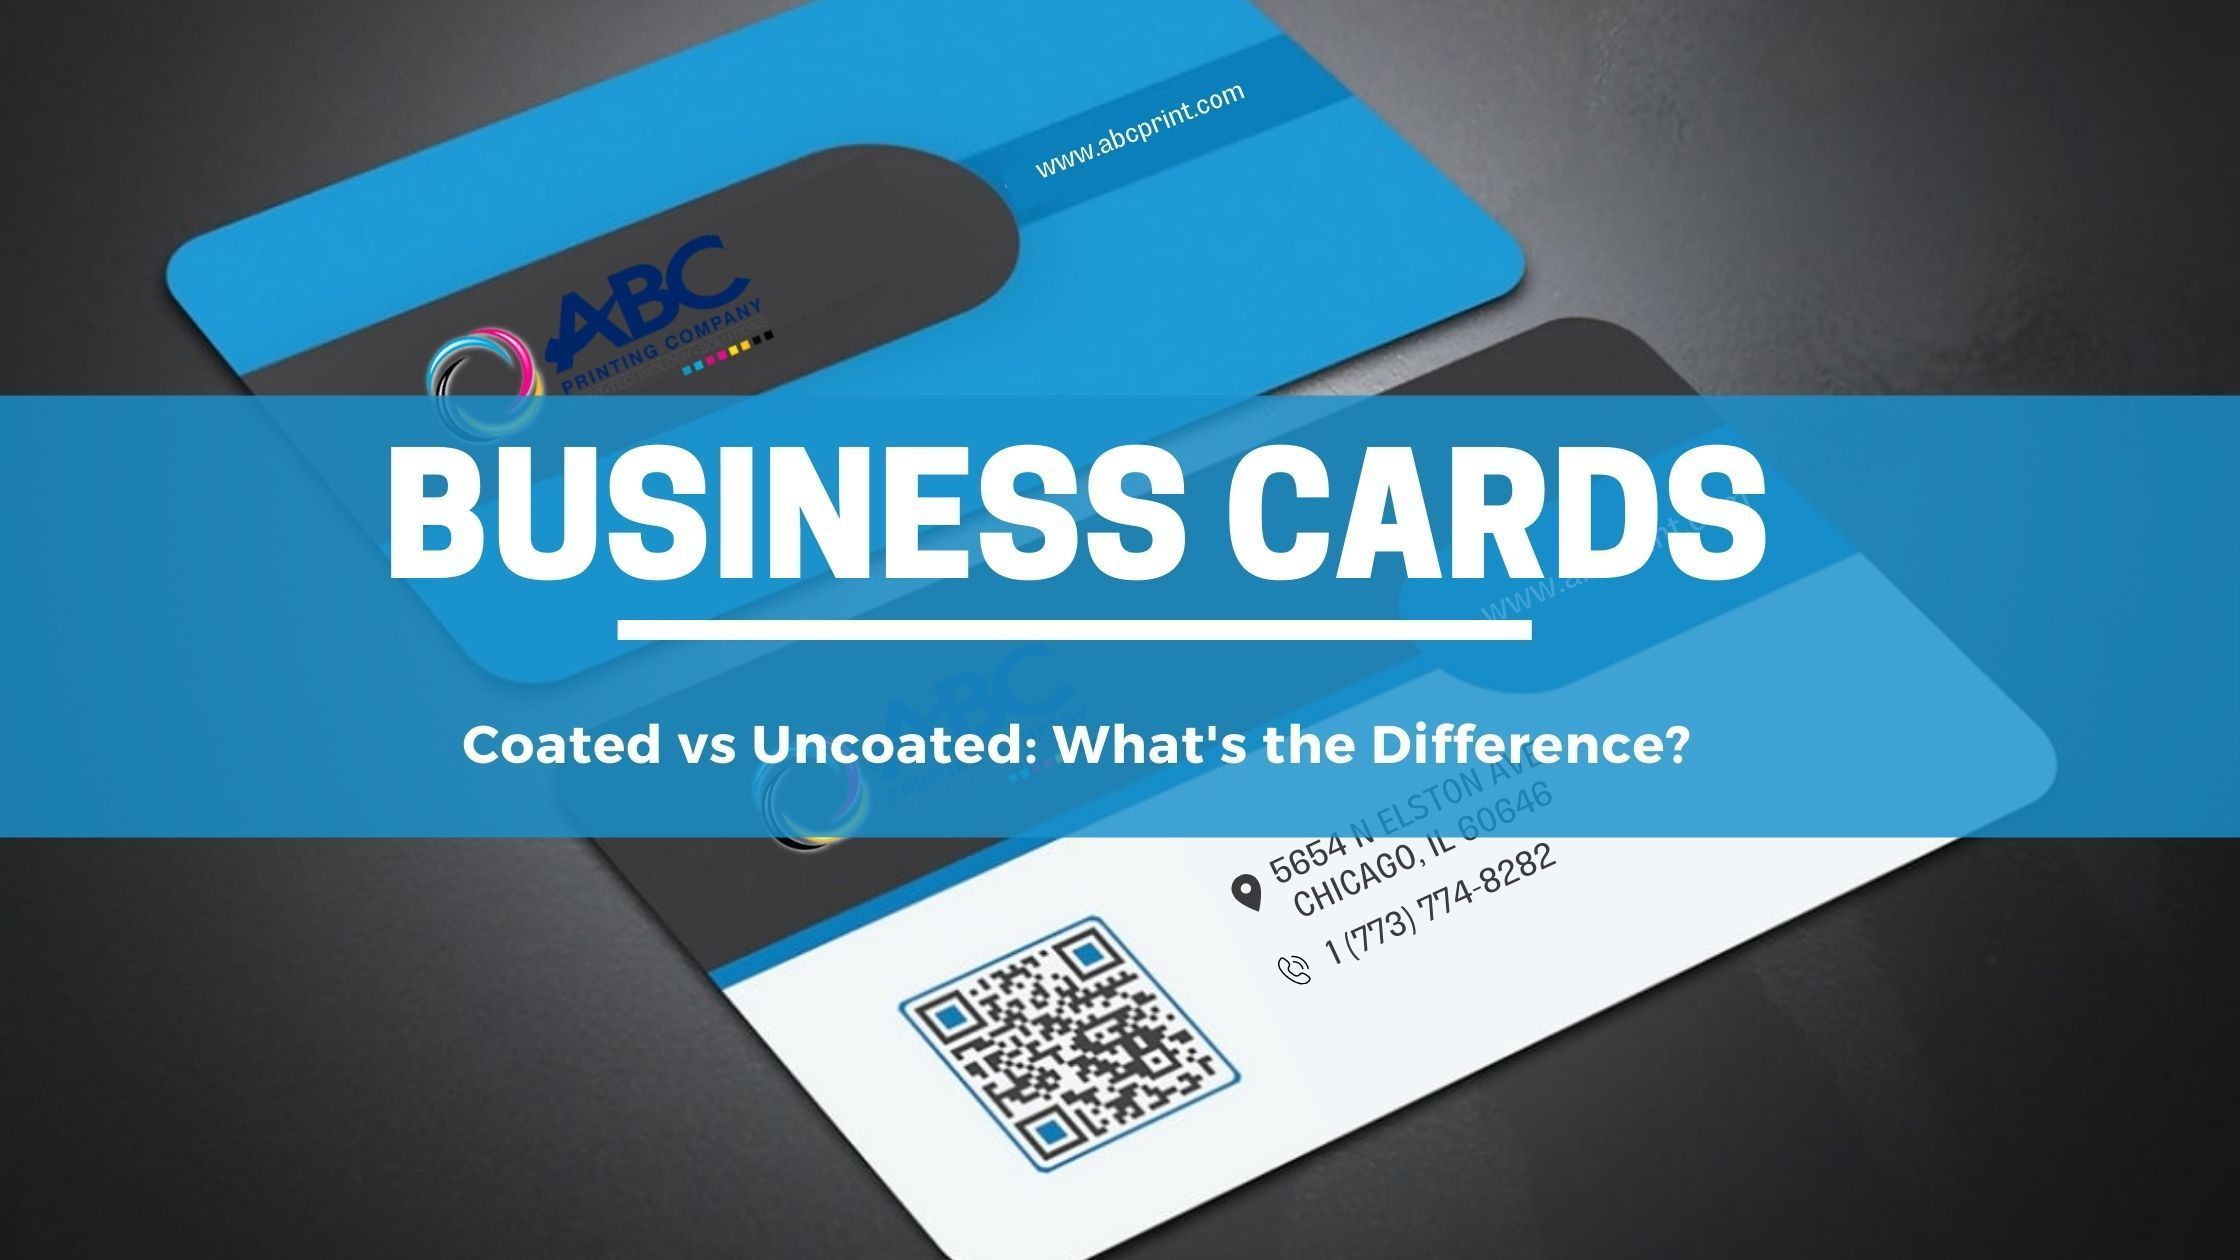 Coated vs Uncoated Business Cards: What's the difference?